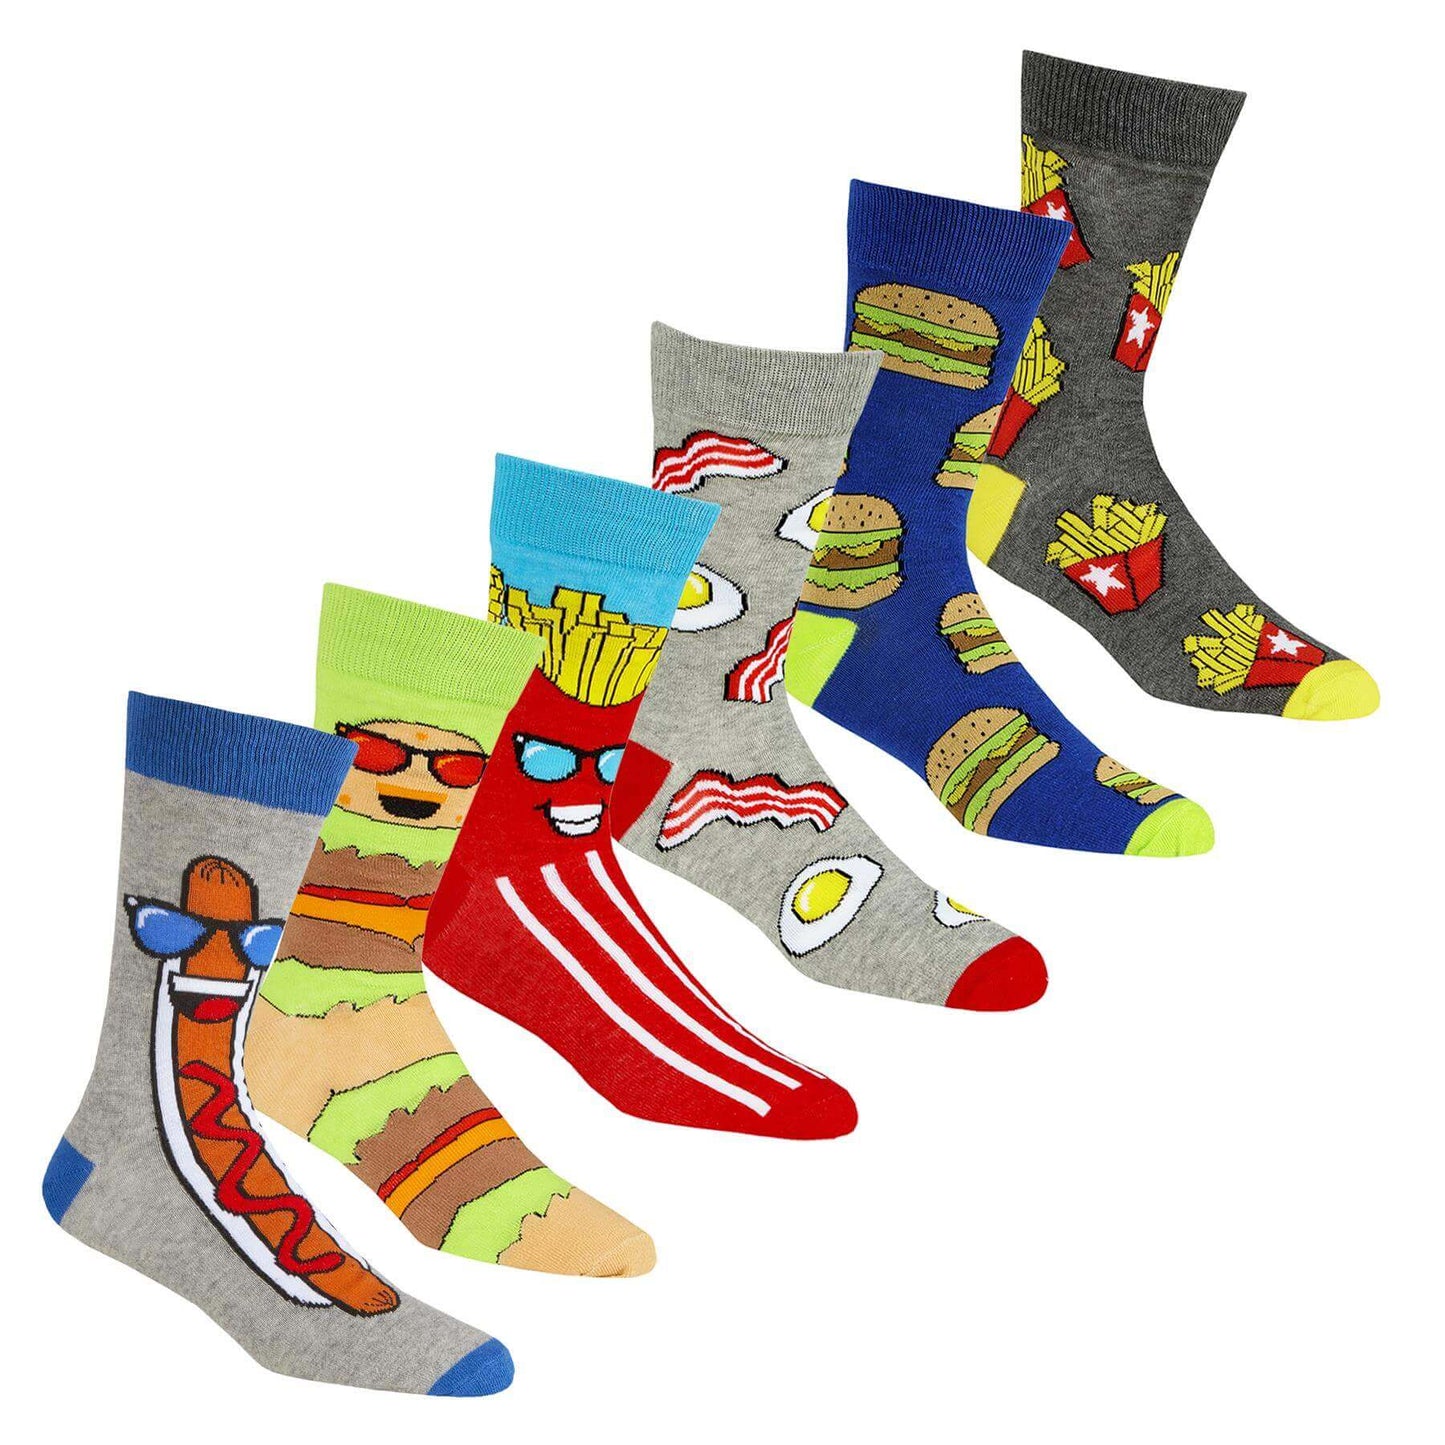 6 Pack Men's Socks Novelty Design Fun Sock, Trendy Everyday Cotton Rich Socks. Buy now for £9.00. A Socks by Sock Stack. 6-11, animals, assorted, boys, boys socks, breathable, burger, camo, camouflage, comfortable, cosy, cotton, cotton blend, dinosaur, dr